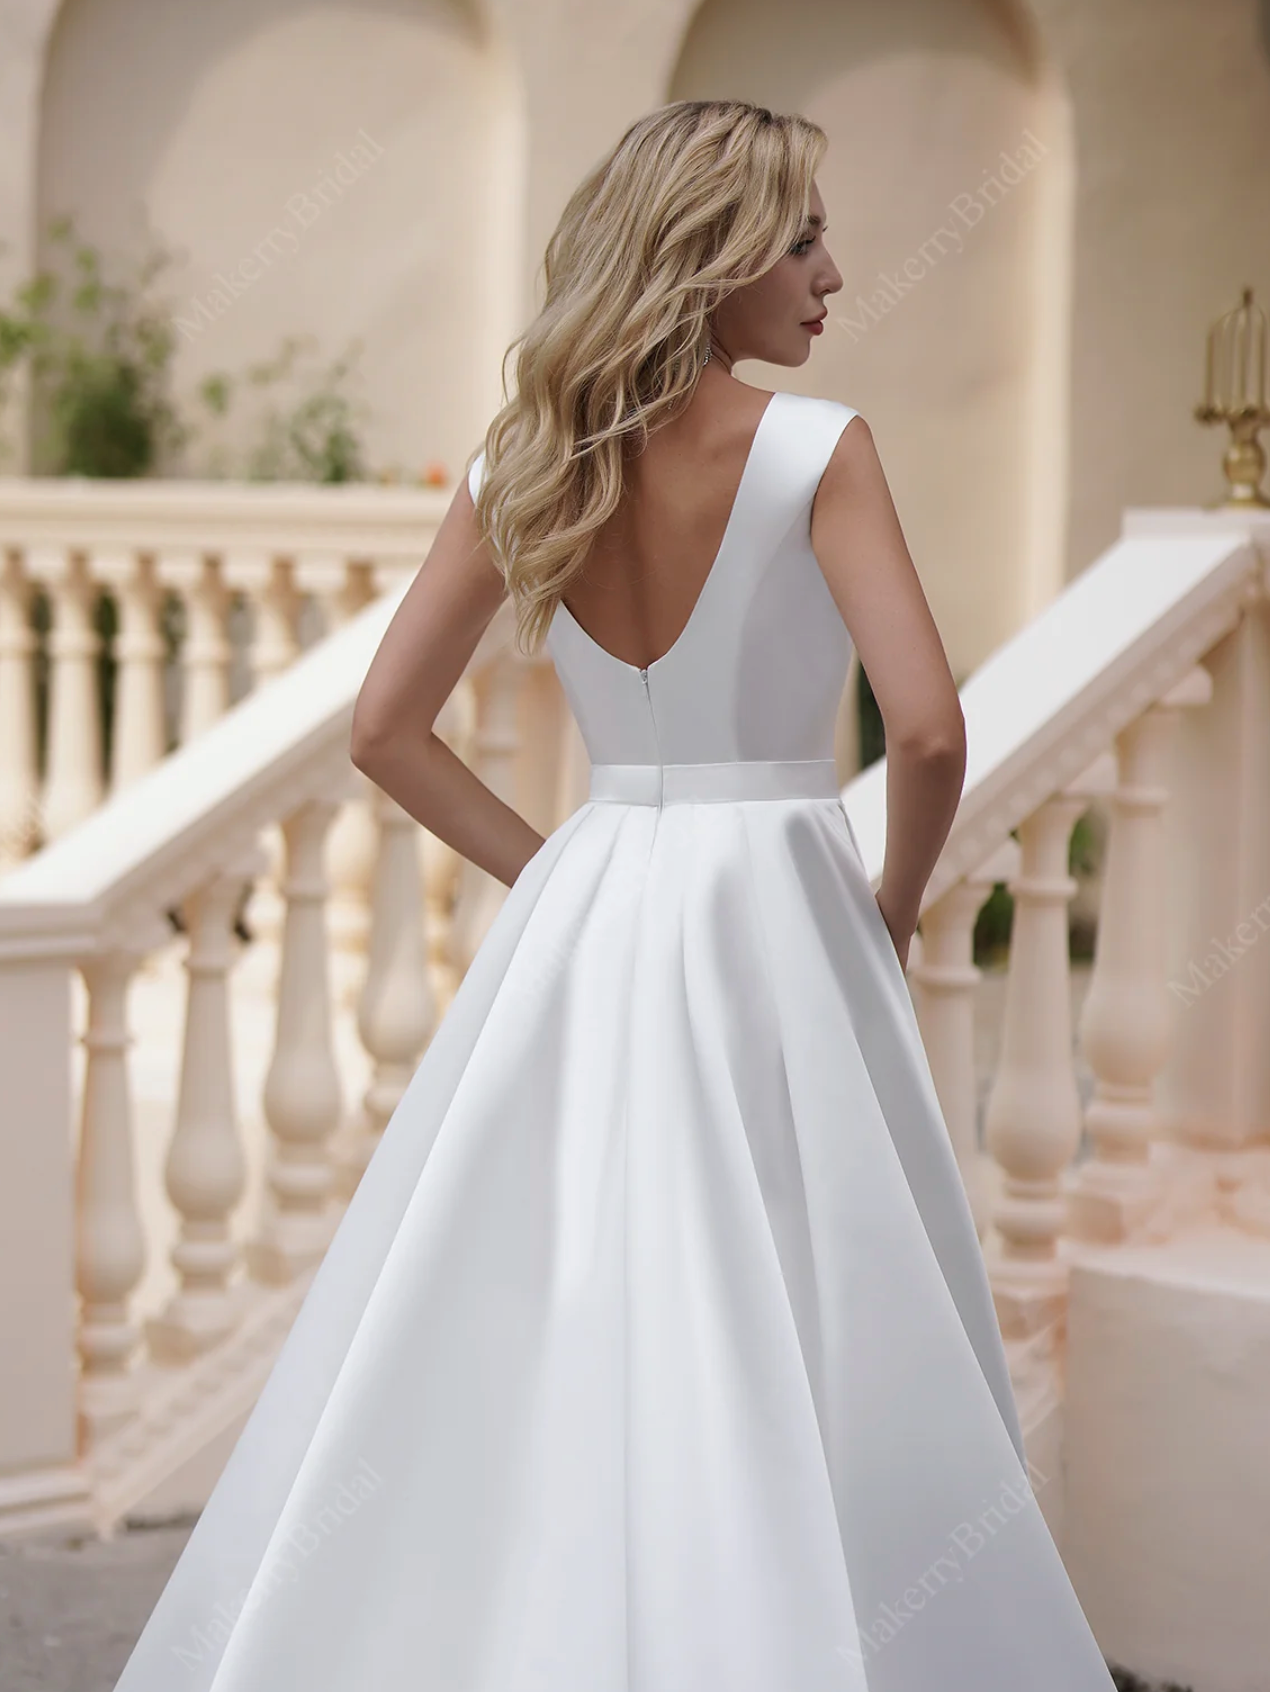 Wedding Dress 101: What Fabric Is Your Dress Made Of?